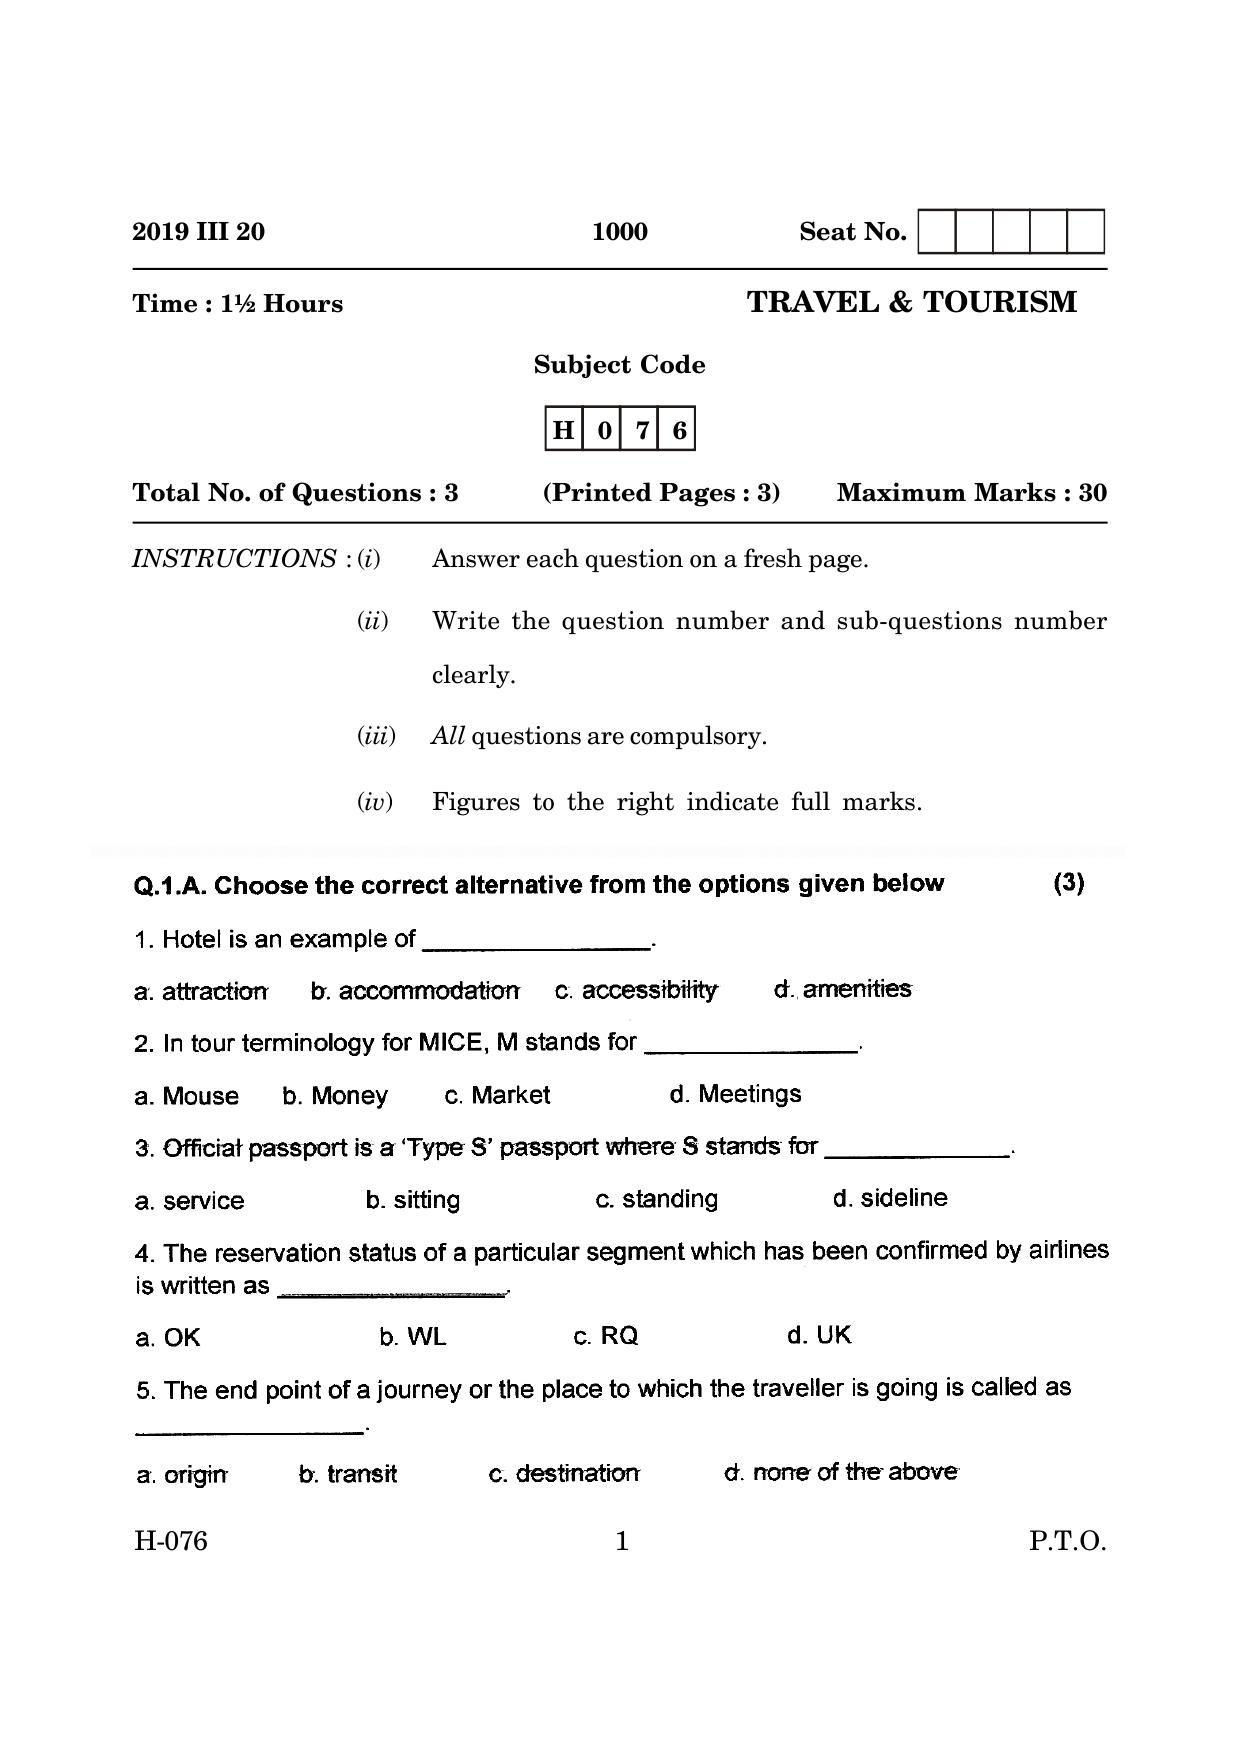 Goa Board Class 12 Travel & Tourism   (March 2019) Question Paper - Page 1